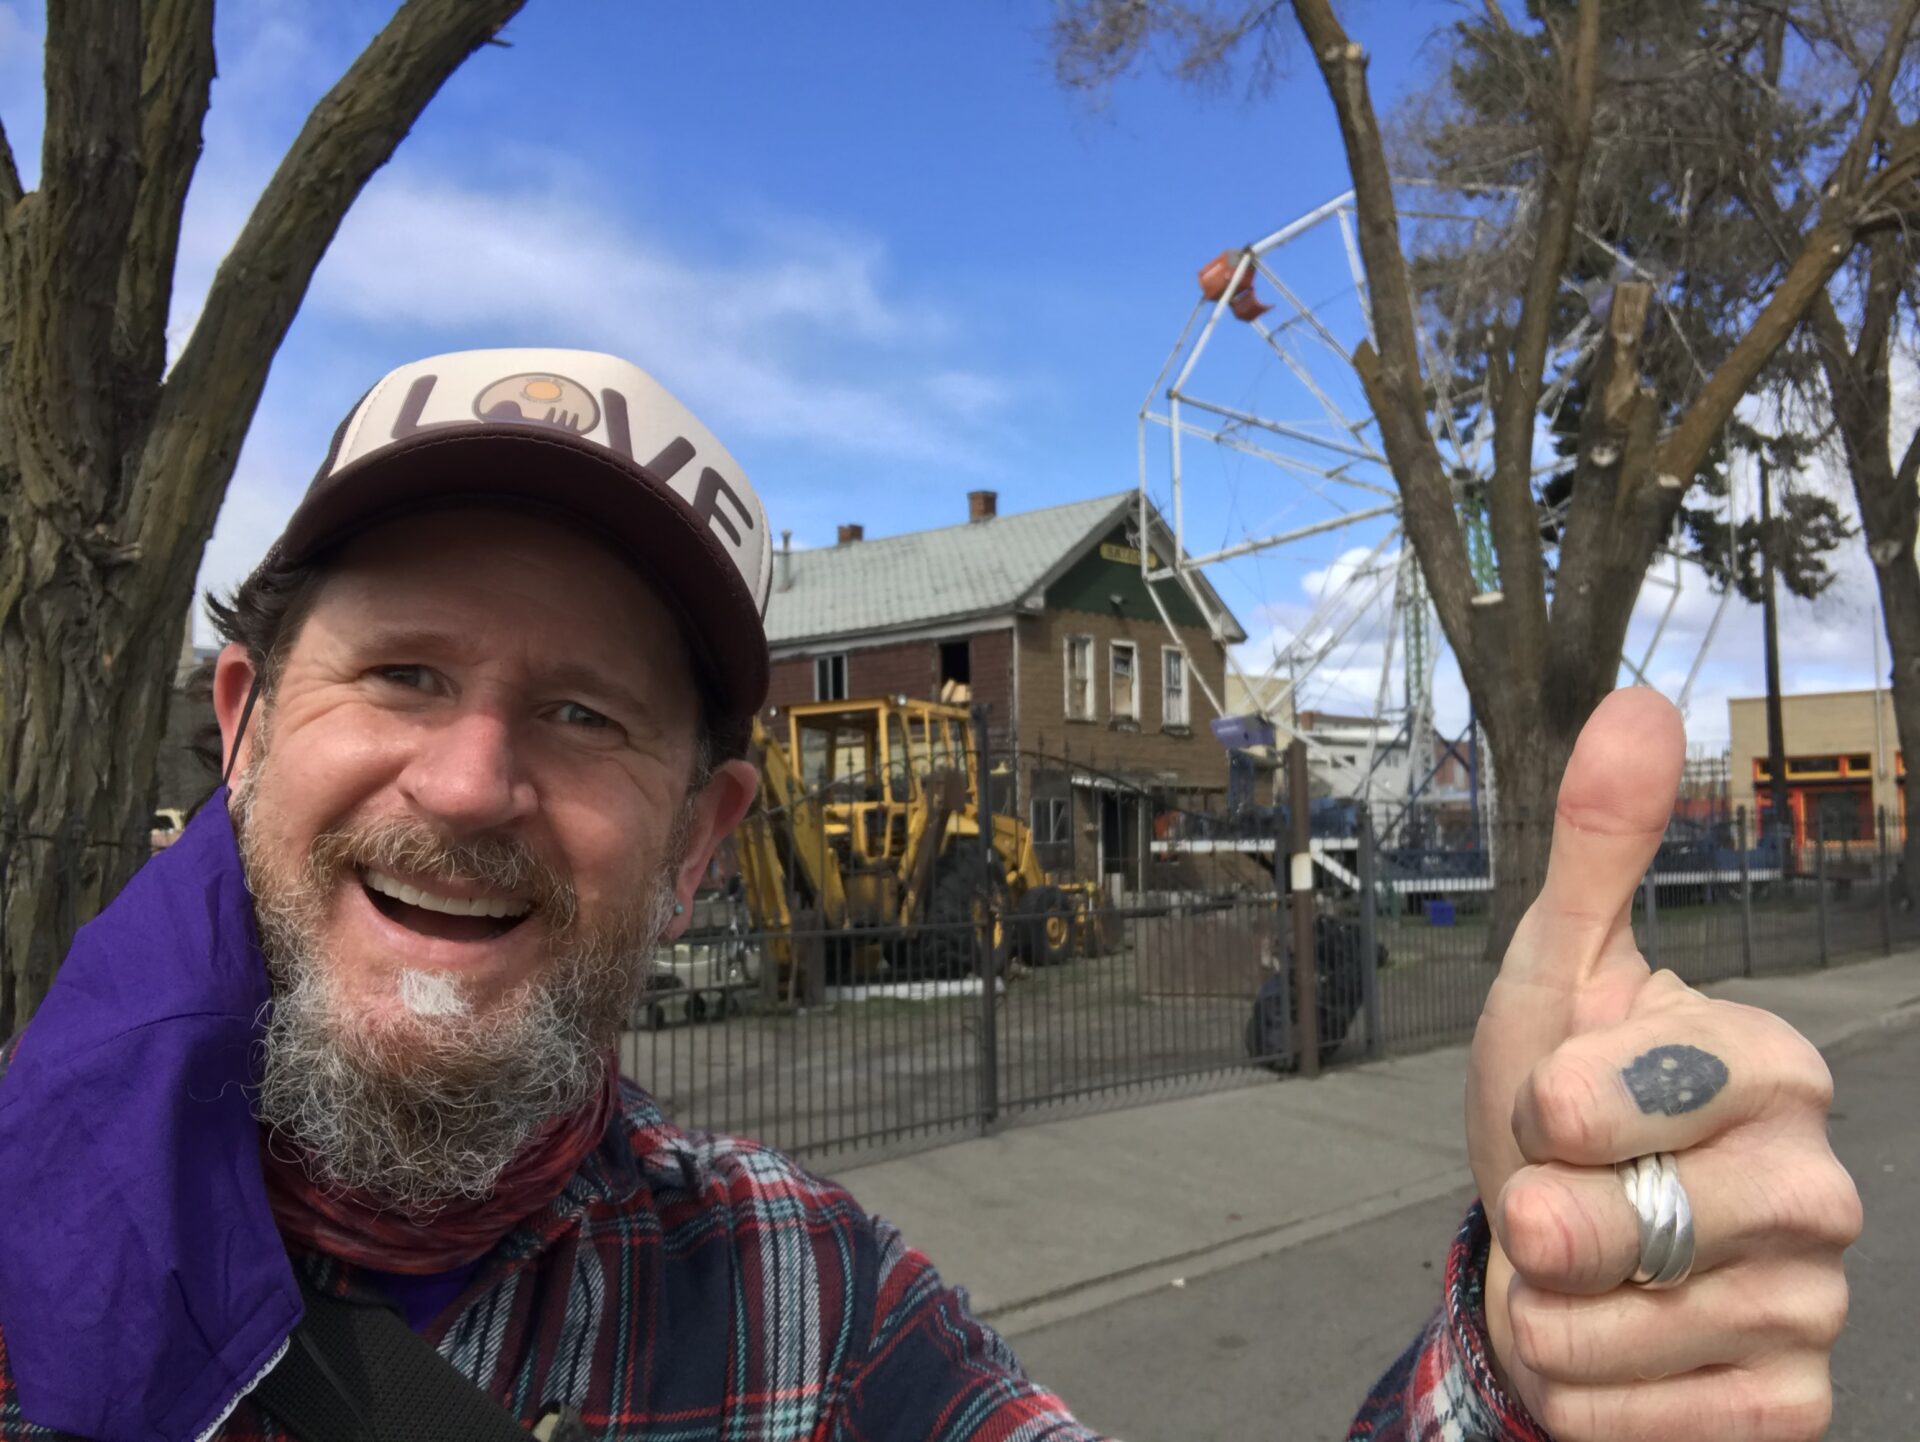 Man taking a selfie with thumbs-up sign to celebrate his walk in a new neighborhood in Spokane. House and street in background.